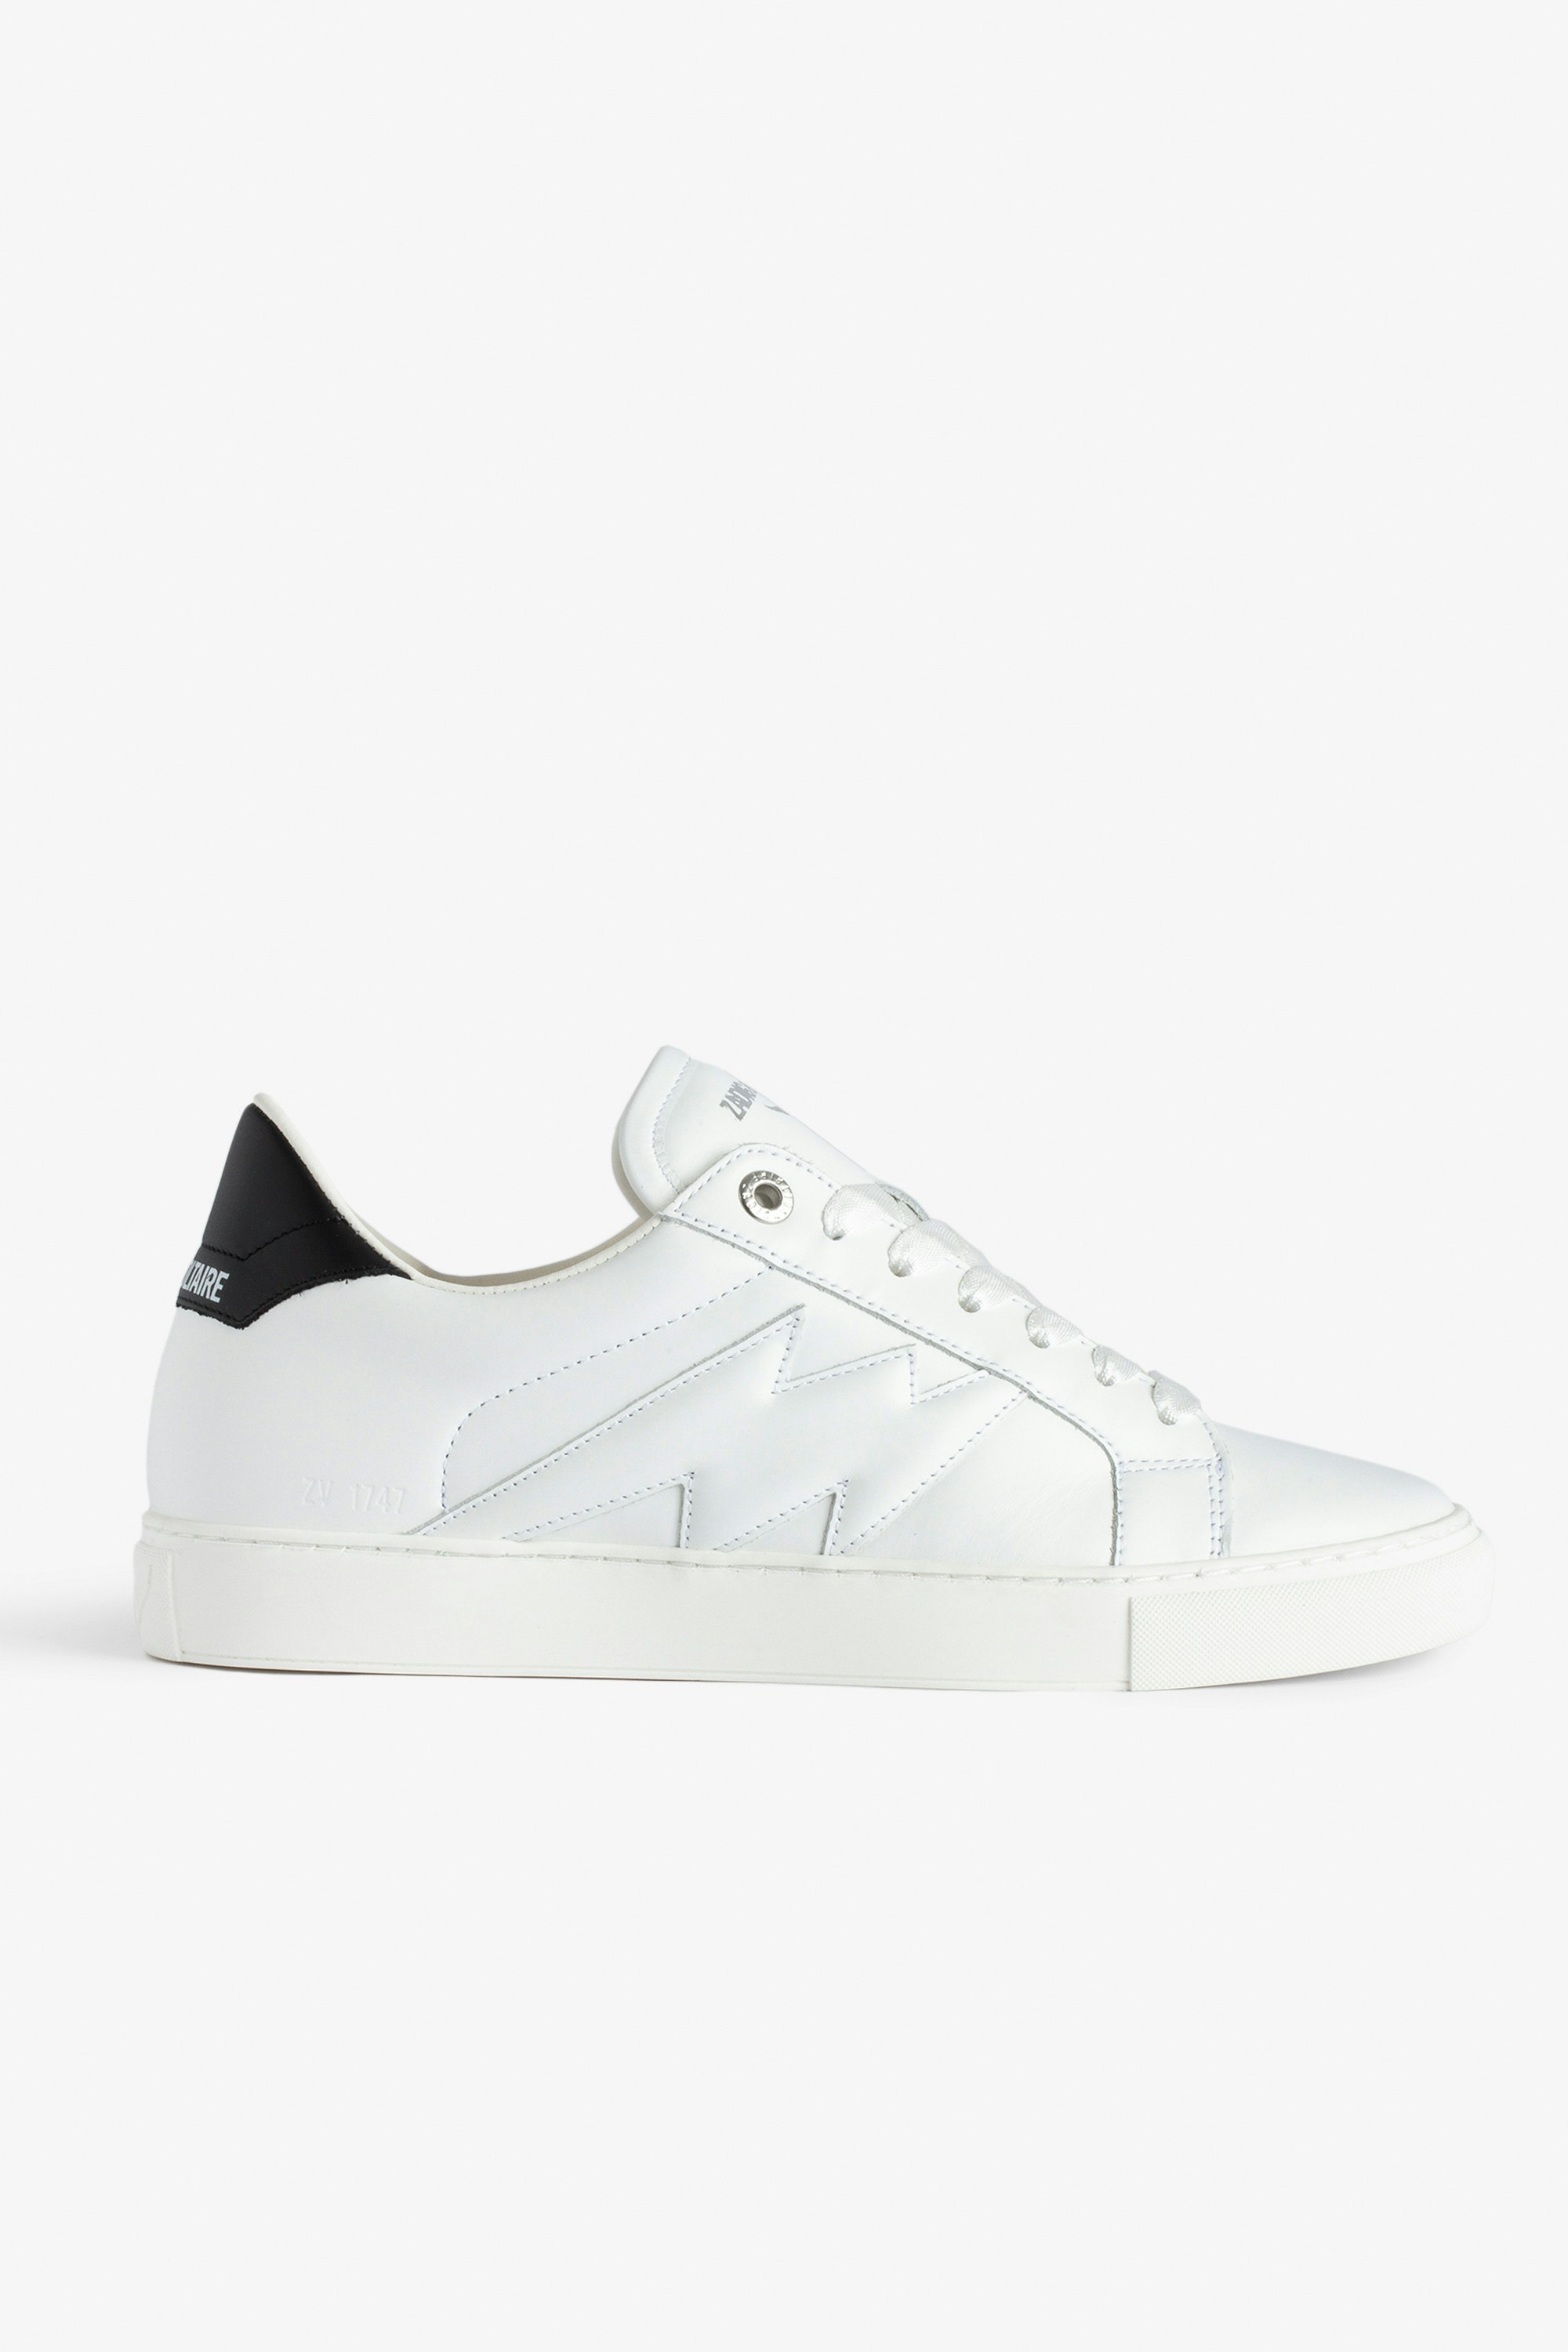 ZV1747 La Flash Low-Top Trainers - Women’s white smooth leather low-top trainers with lightning bolt panels and contrasting reinforcement.